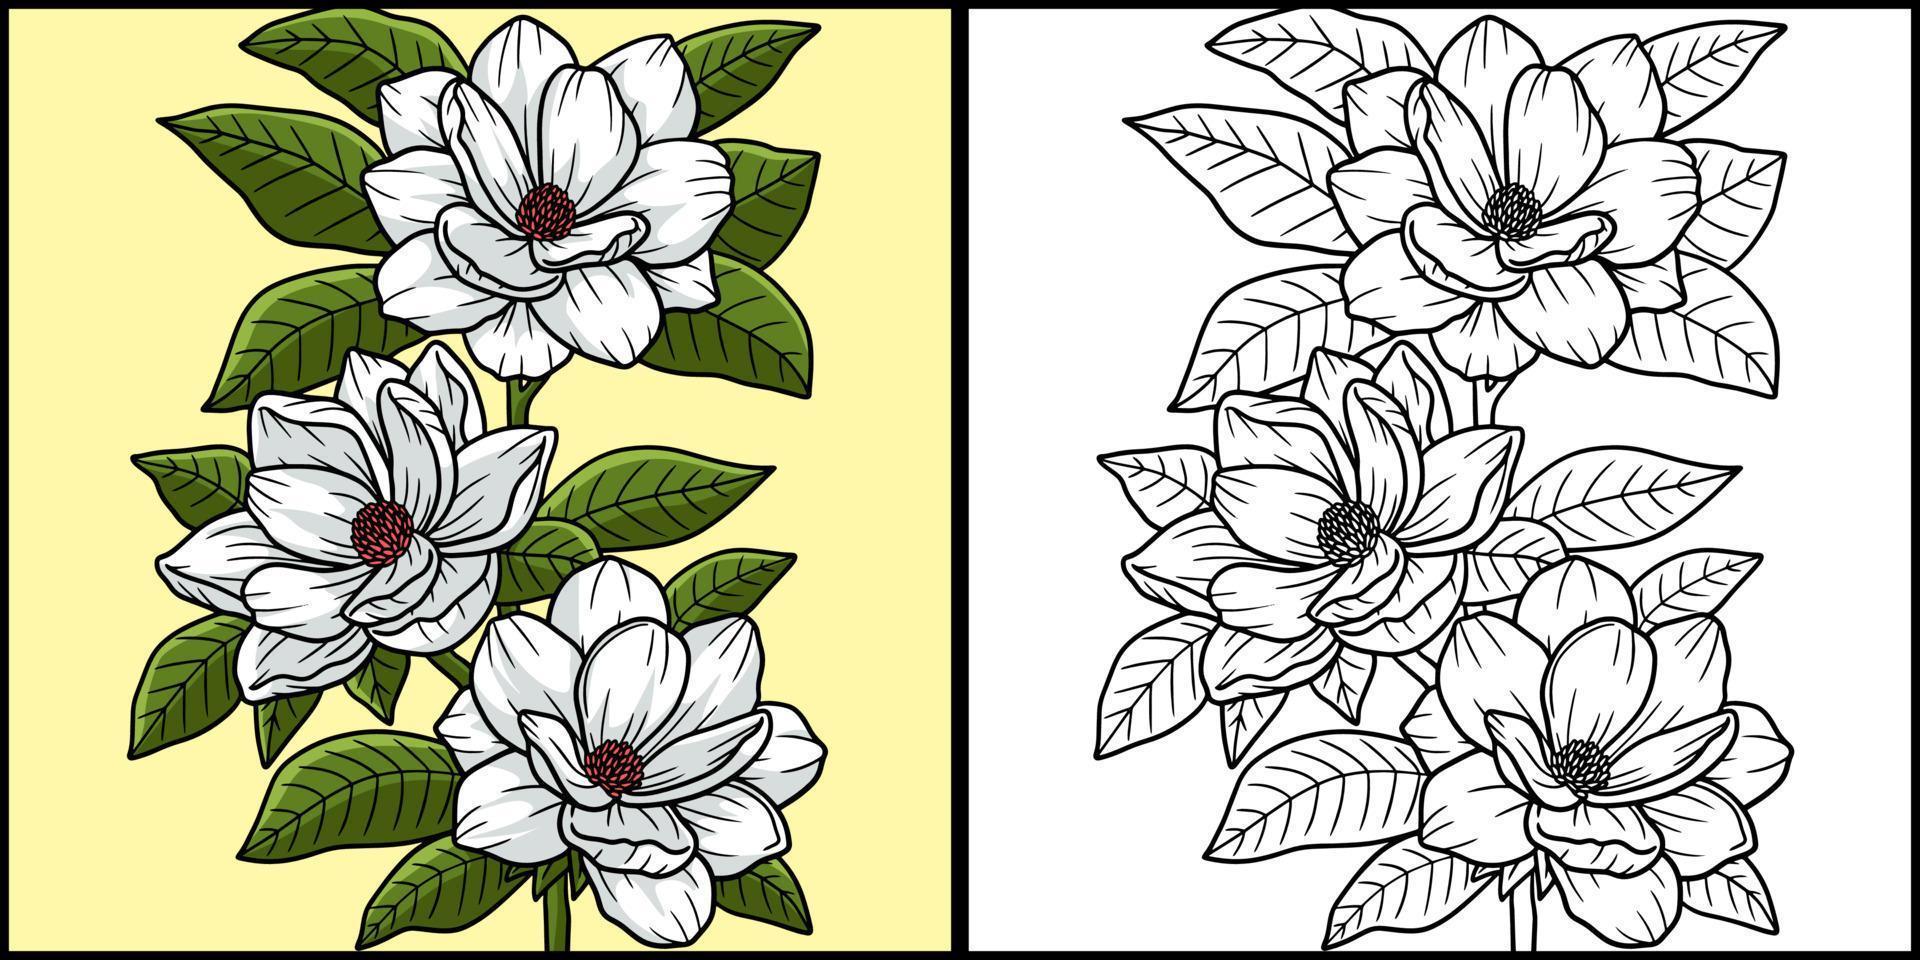 Magnolia Flower Coloring Page Colored Illustration vector